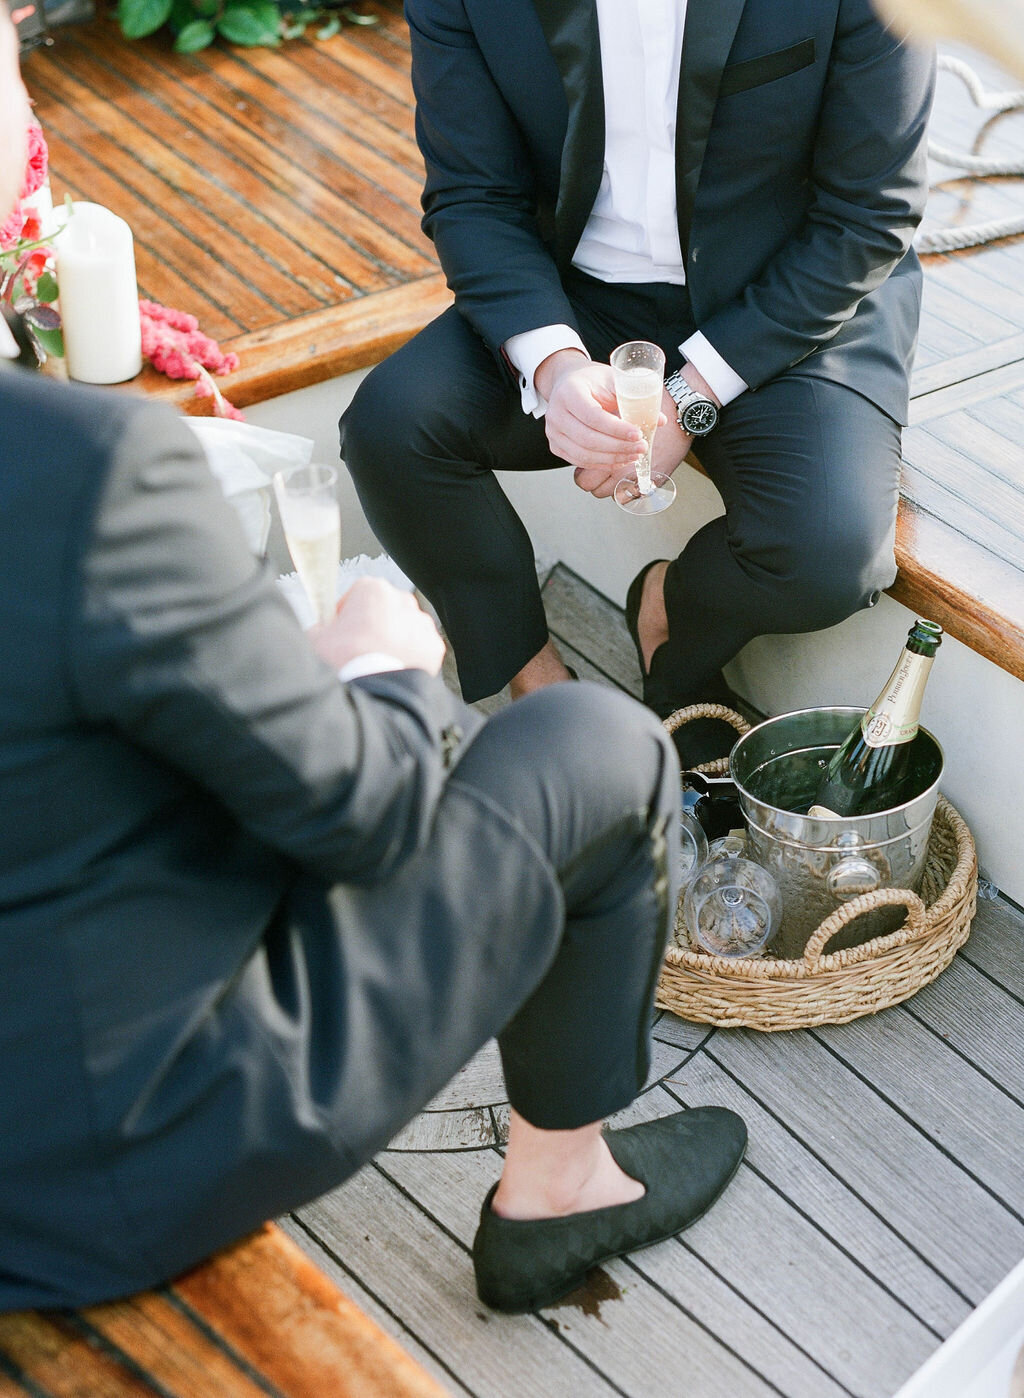 Kate-Murtaugh-Events-Boston-Harbor-sail-boat-yacht-elopement-wedding-planner-grooms-champagne-toast